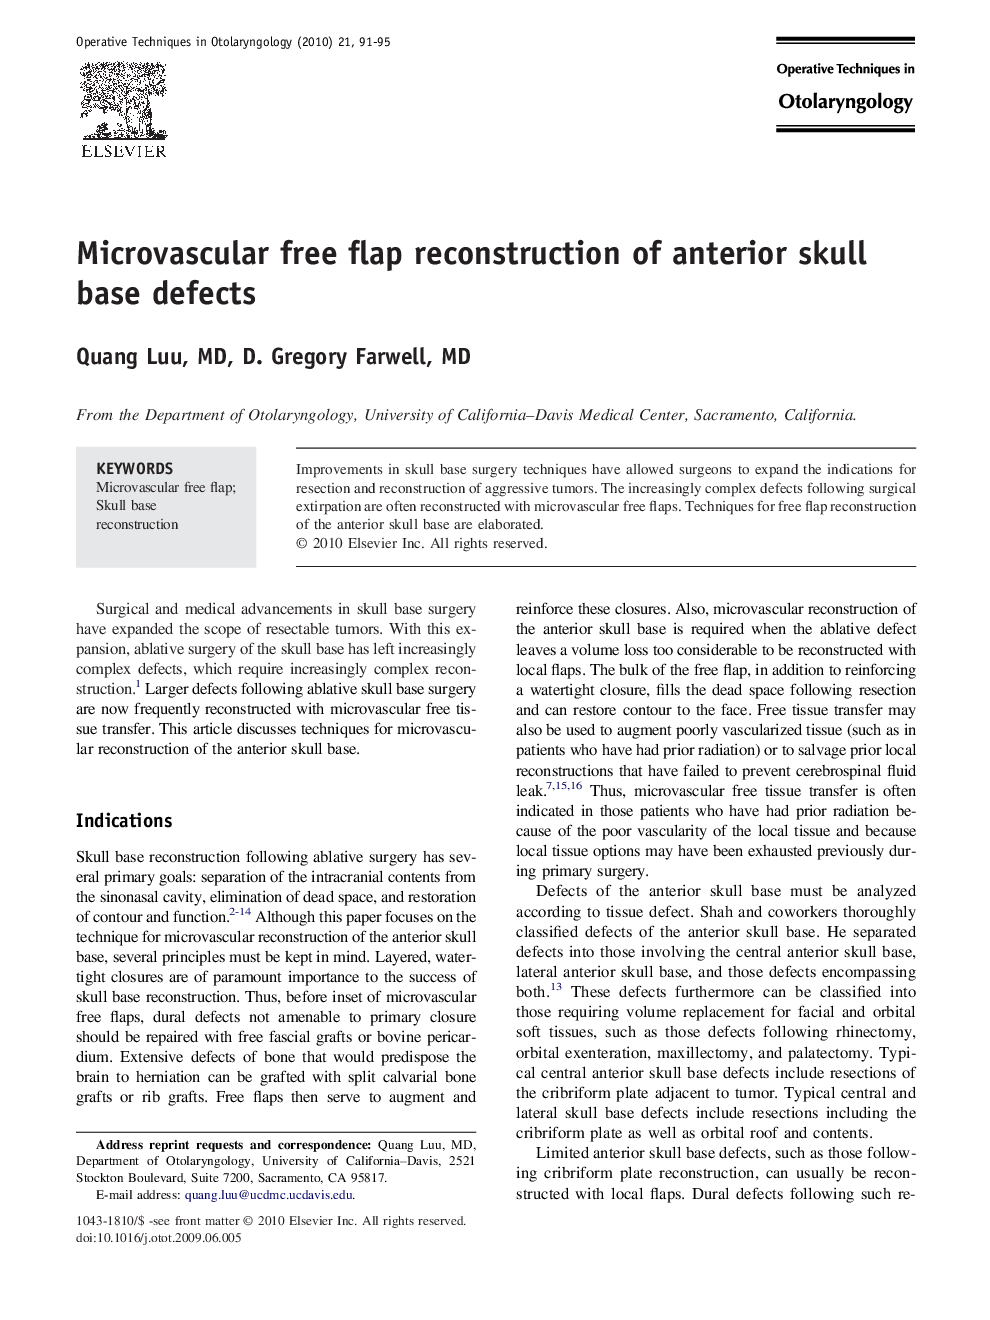 Microvascular free flap reconstruction of anterior skull base defects